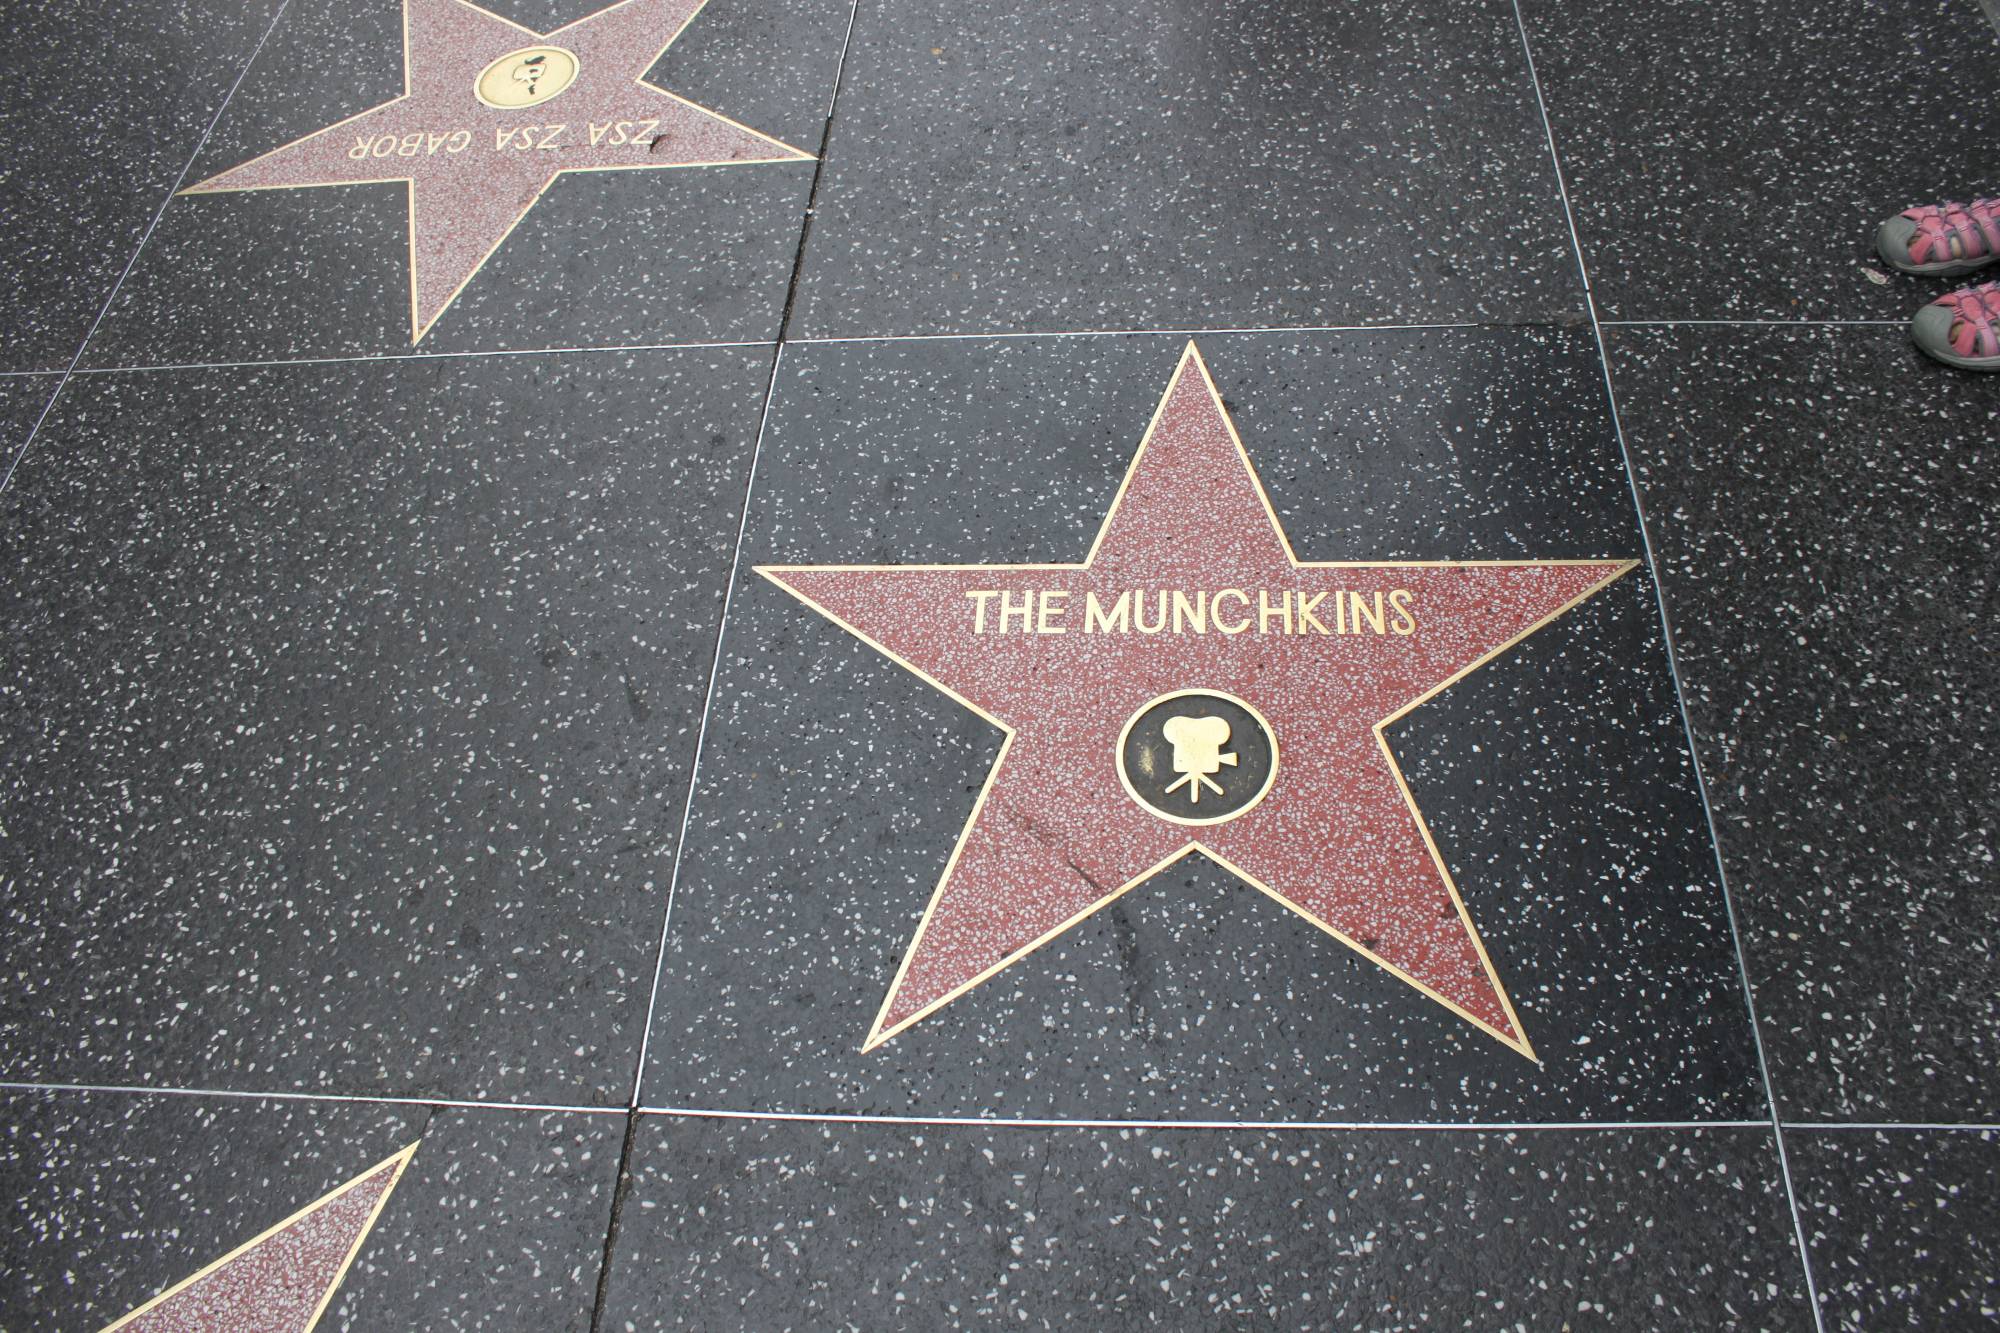 The Wizard of Oz Munchkins - Hollywood Walk of Fame star